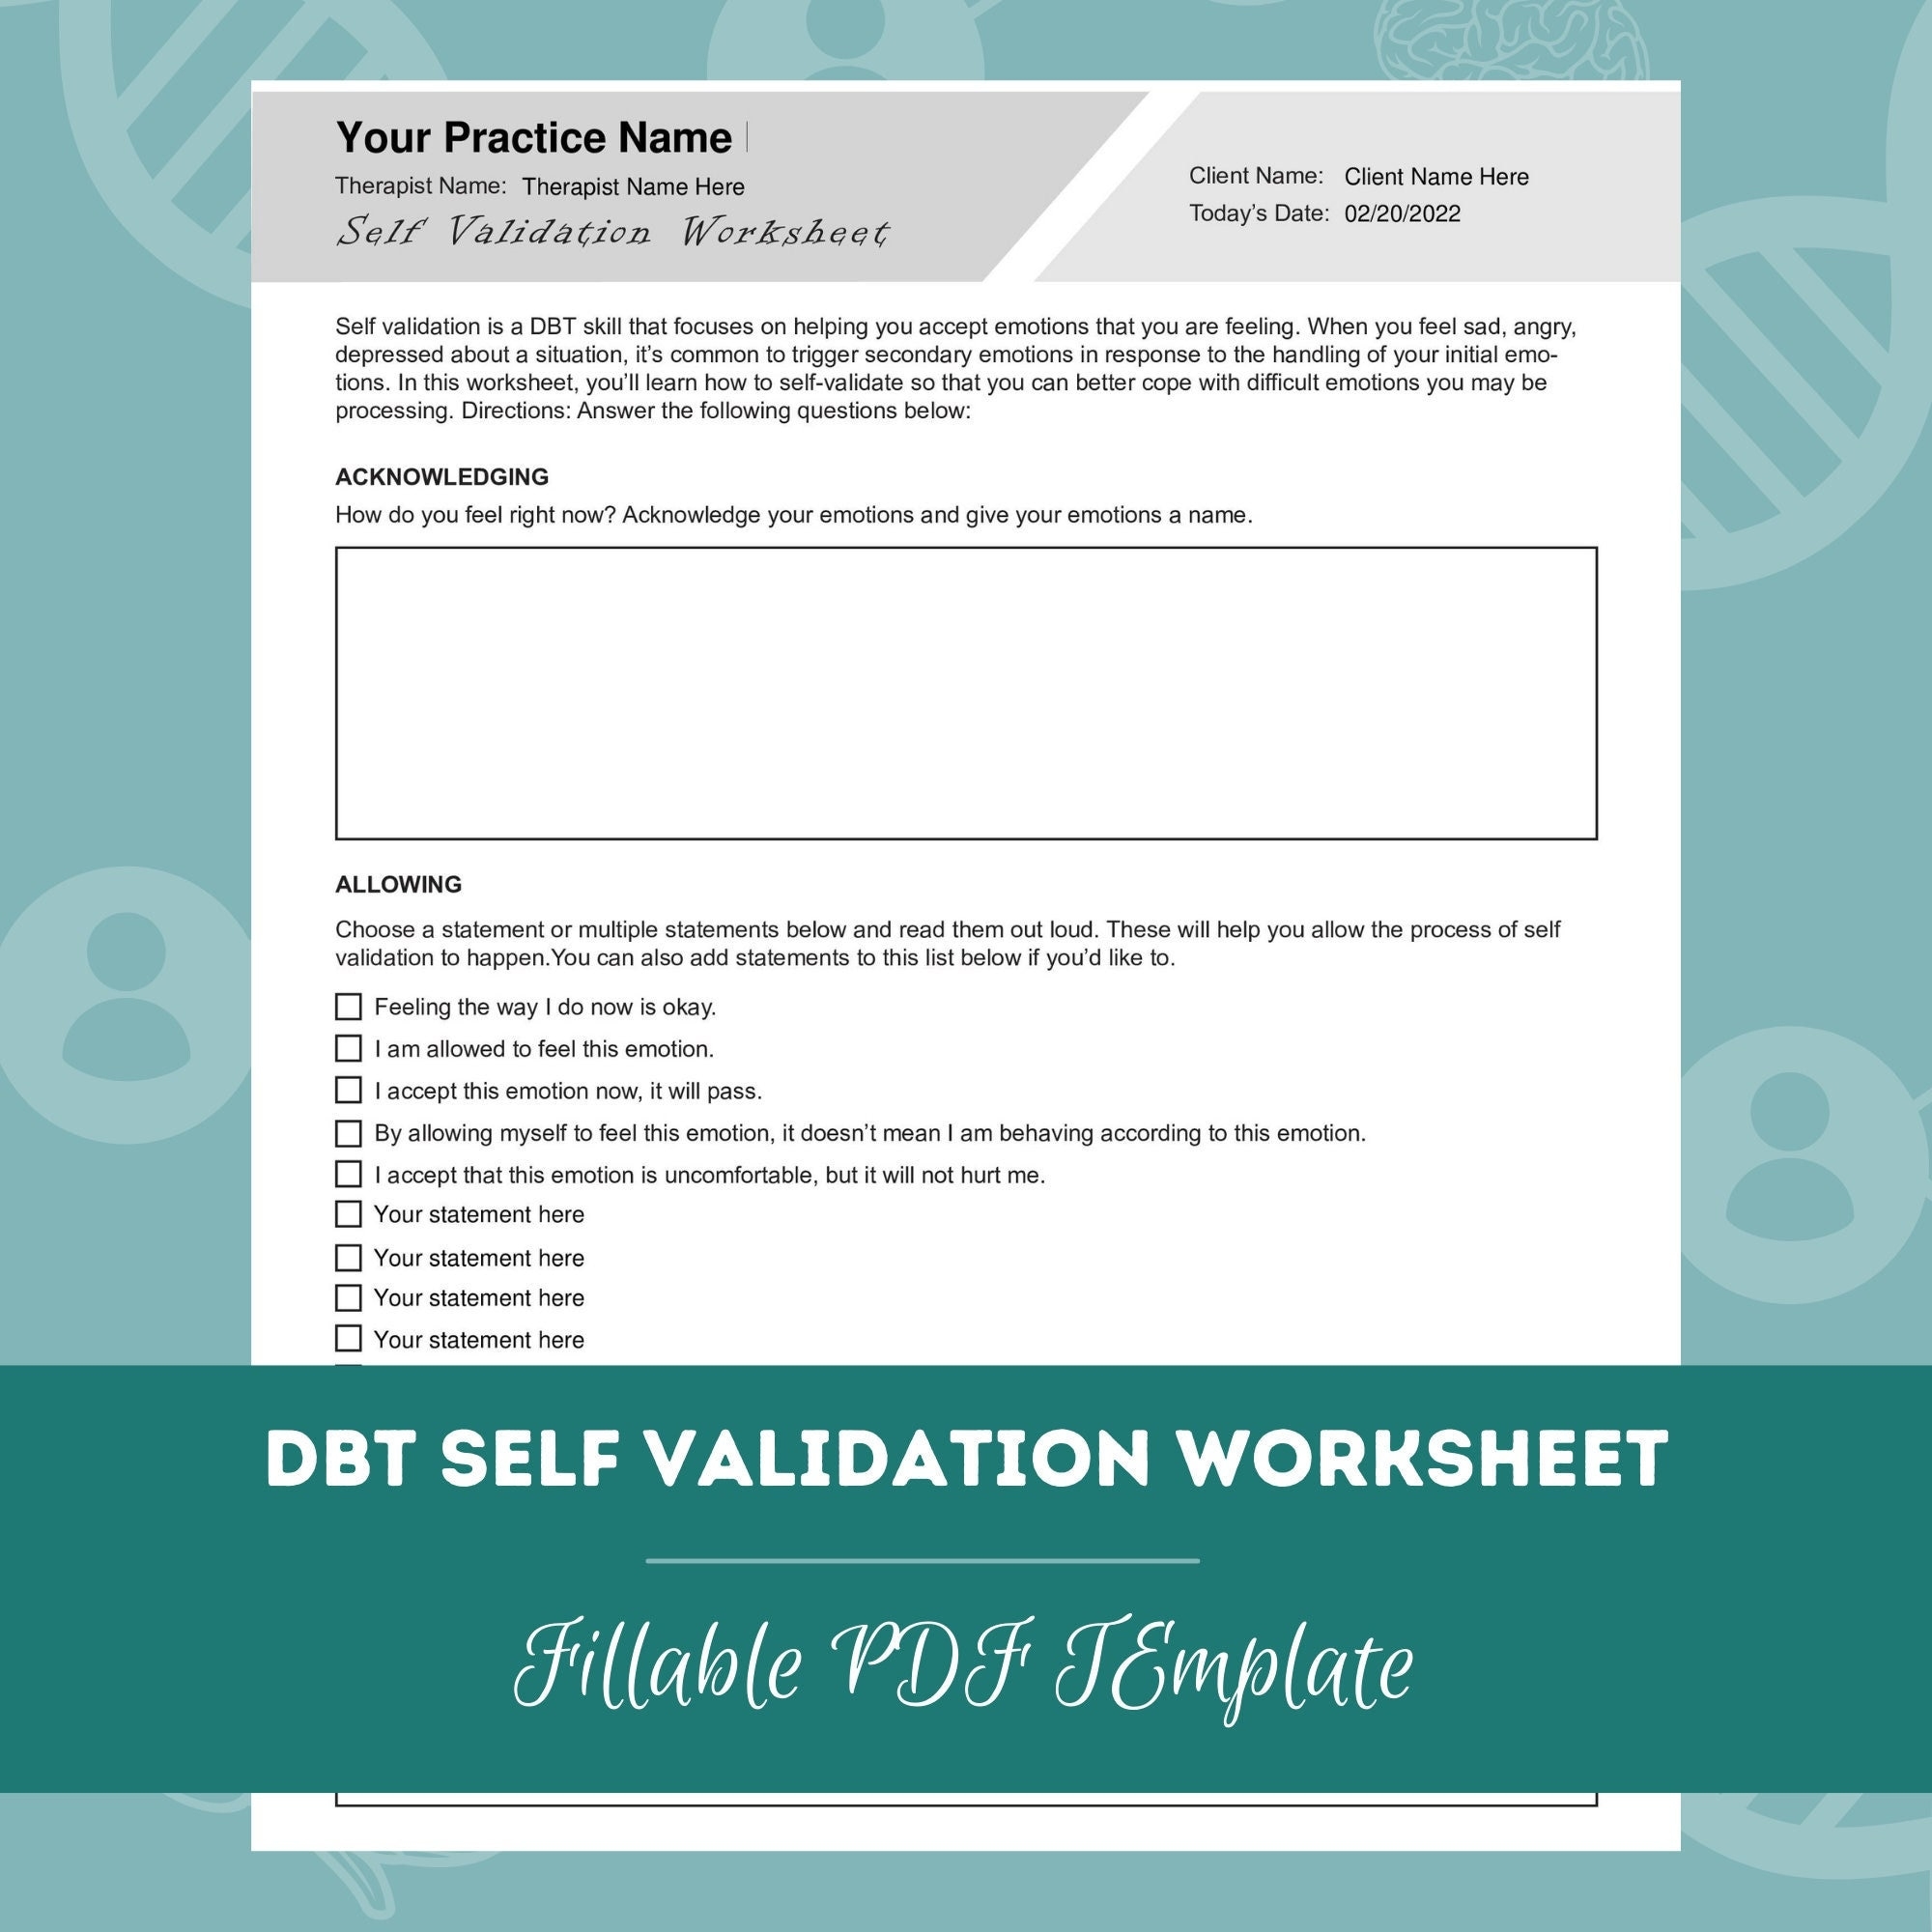 DBT Self Validation Worksheet Editable Fillable PDF Template For Counselors Psychologists Social Workers Therapists Etsy Israel